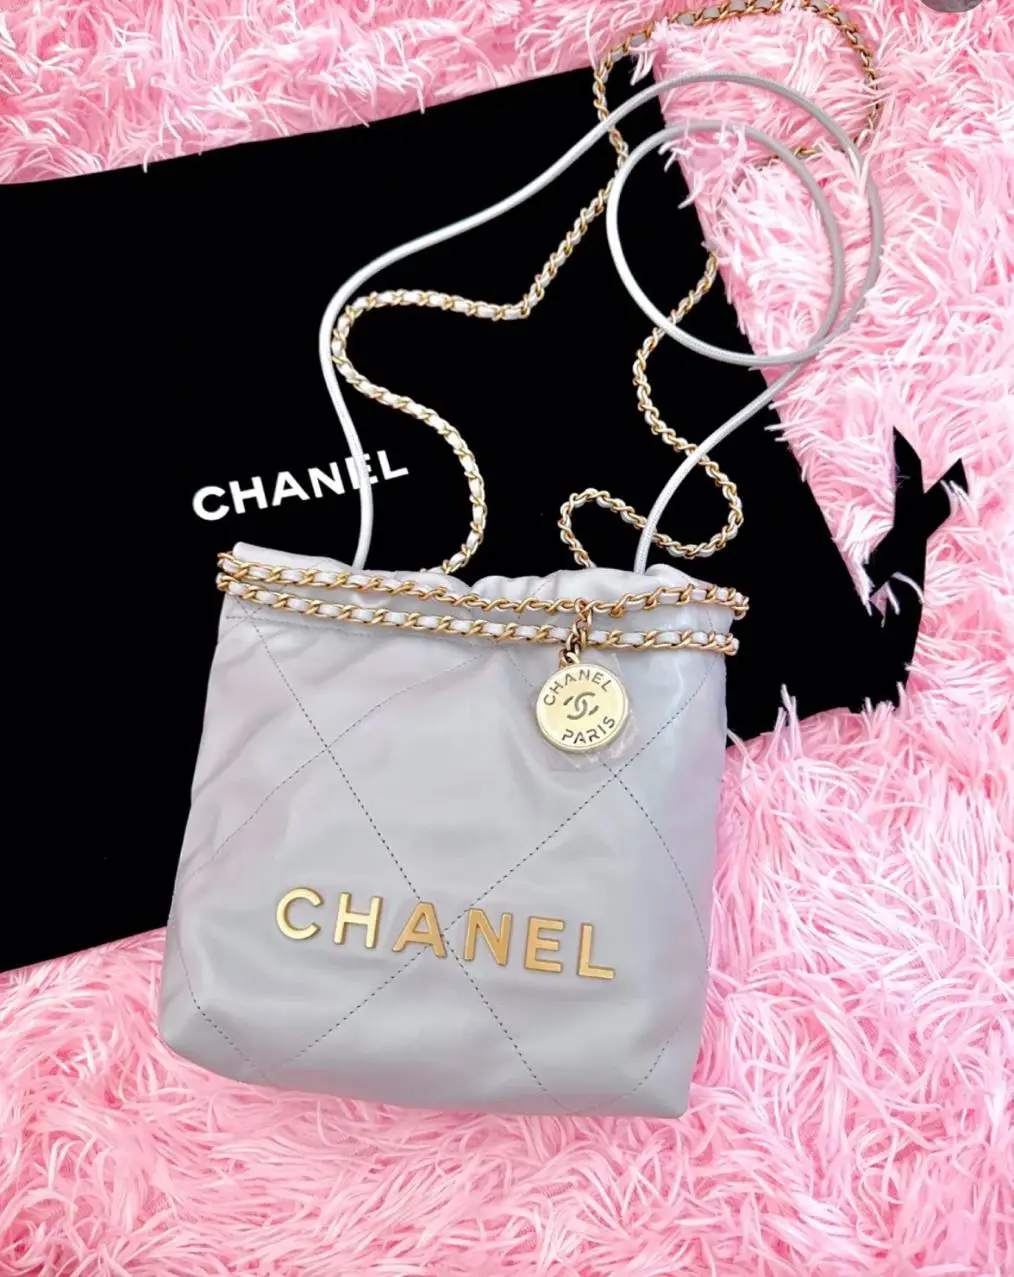 take the trash out  Chanel outfit, Chanel, Trash bags